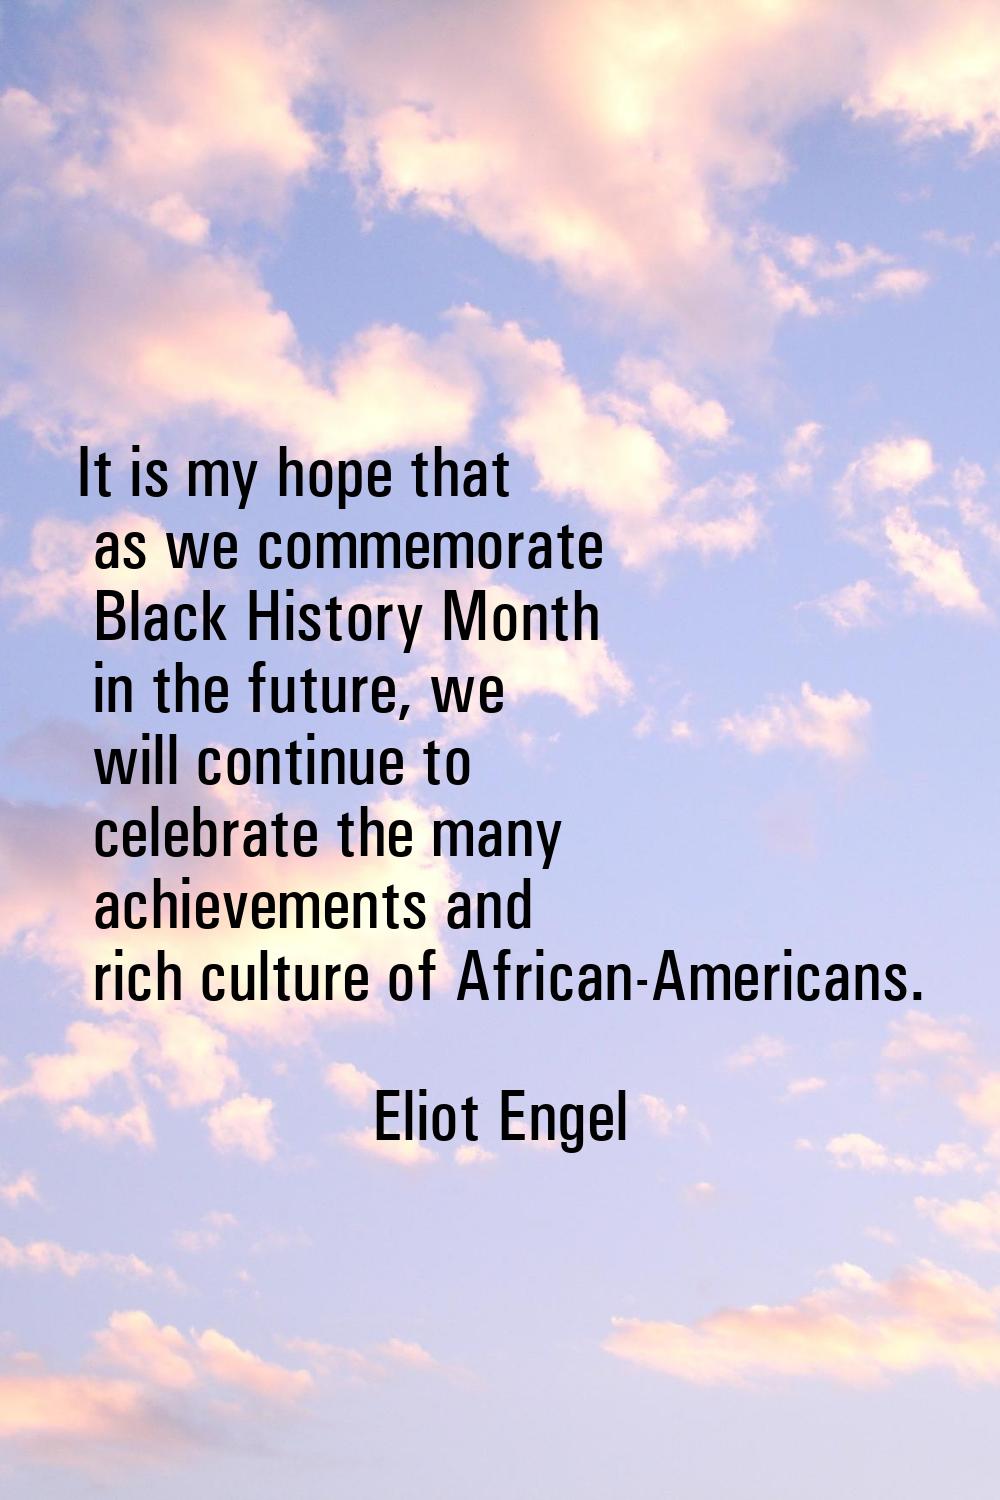 It is my hope that as we commemorate Black History Month in the future, we will continue to celebra